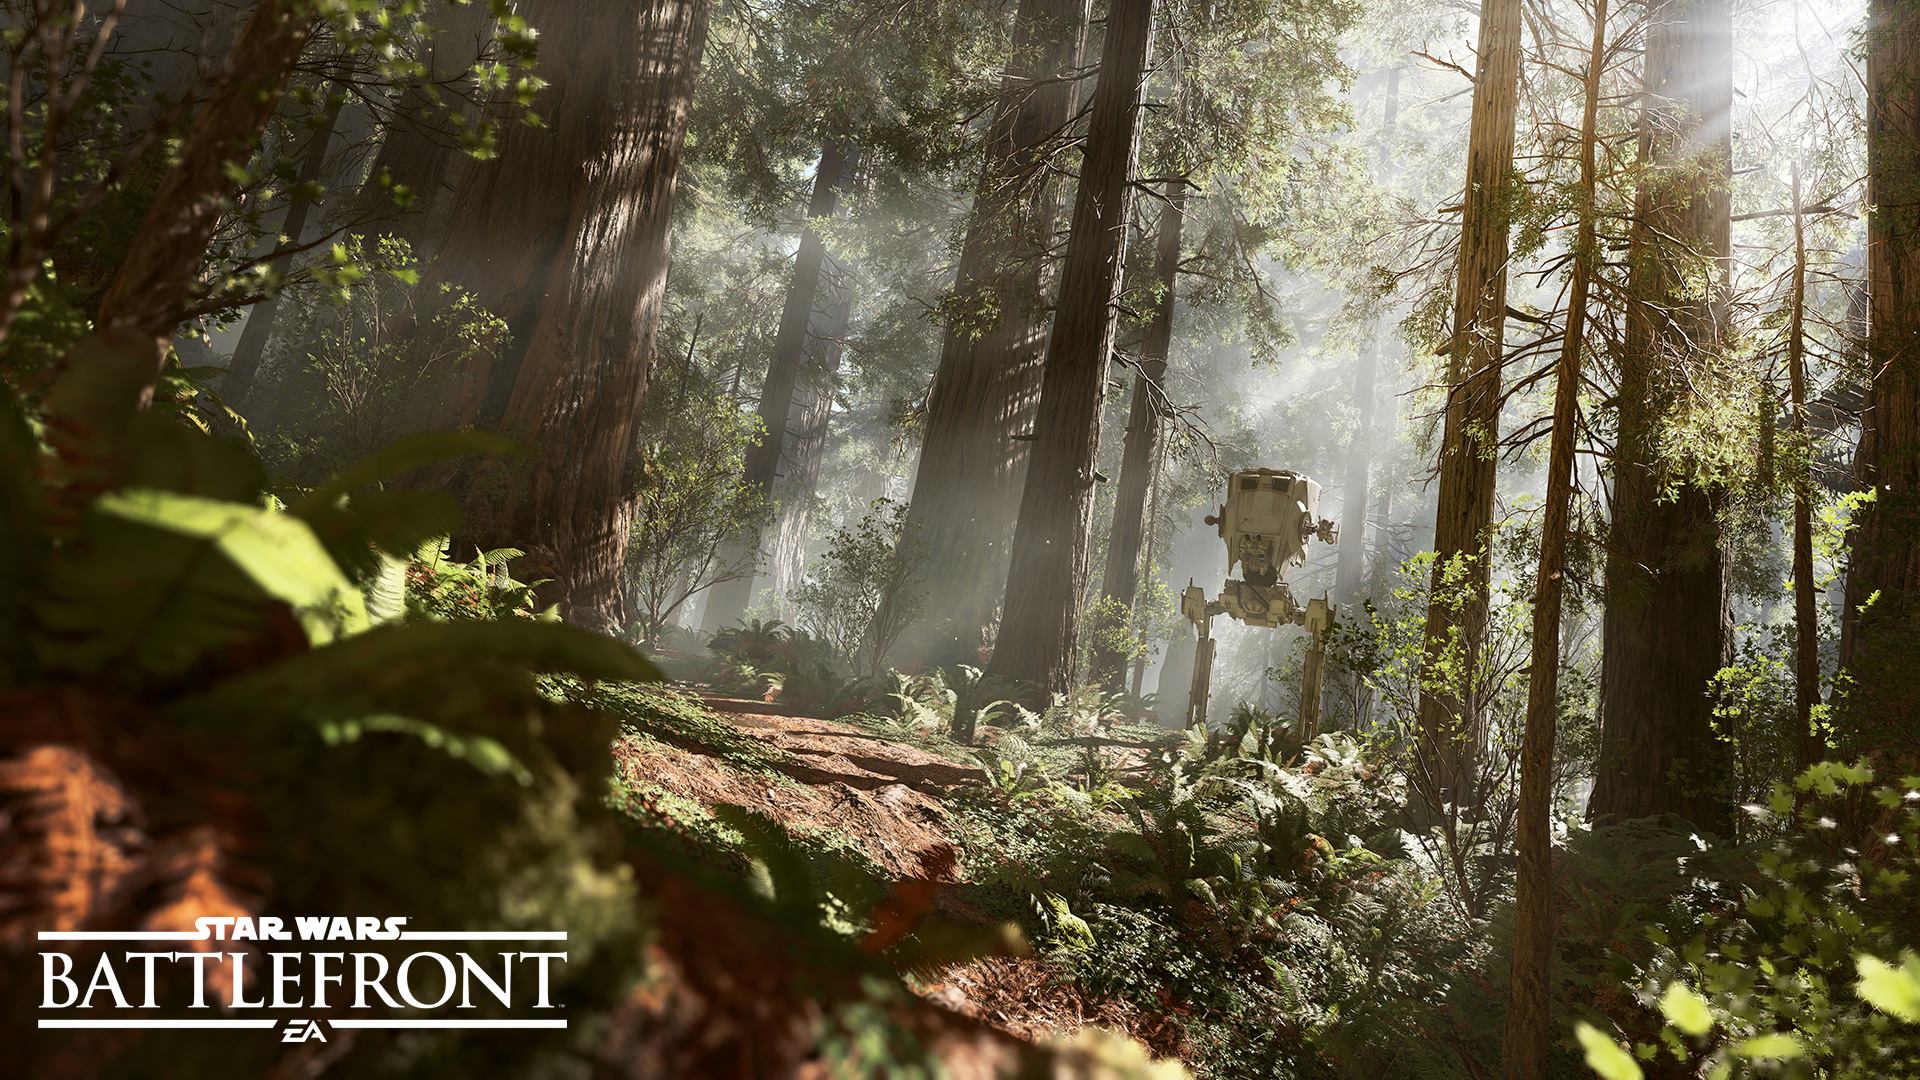 To Make Star Wars Battlefront Look As Visually Authentic Possible